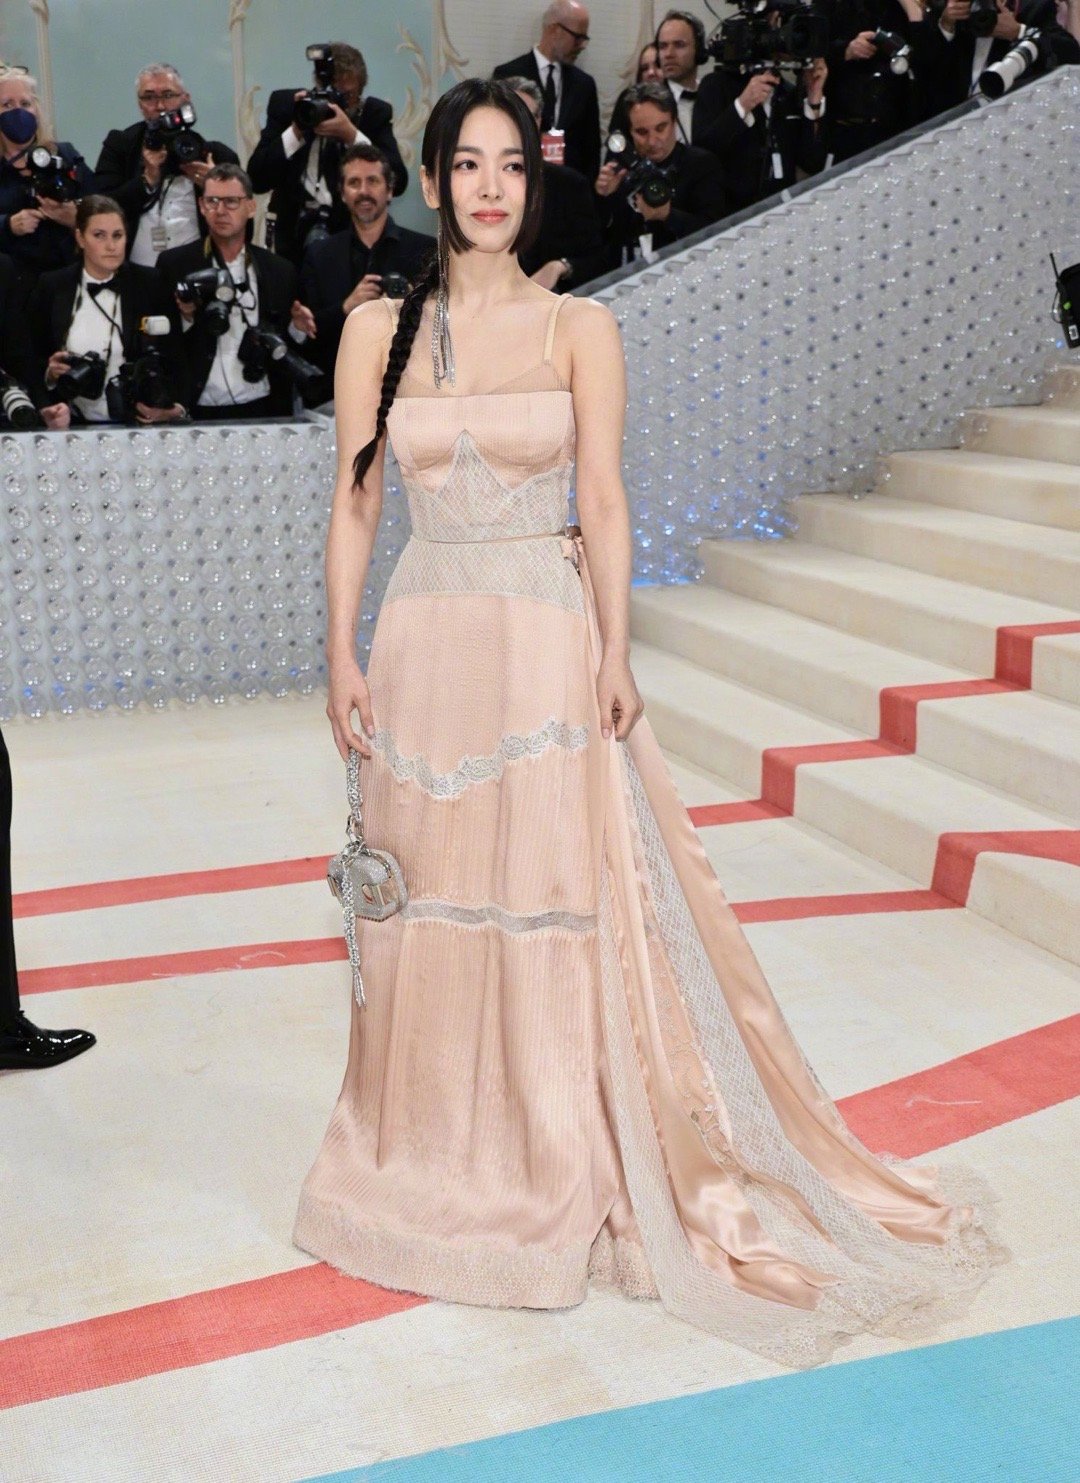 Song Hye Kyo Attends 2023 Met Gala in Custom Fendi Blush Gown with Questionable Braid and Side Bangs Hairstyle | KWriter